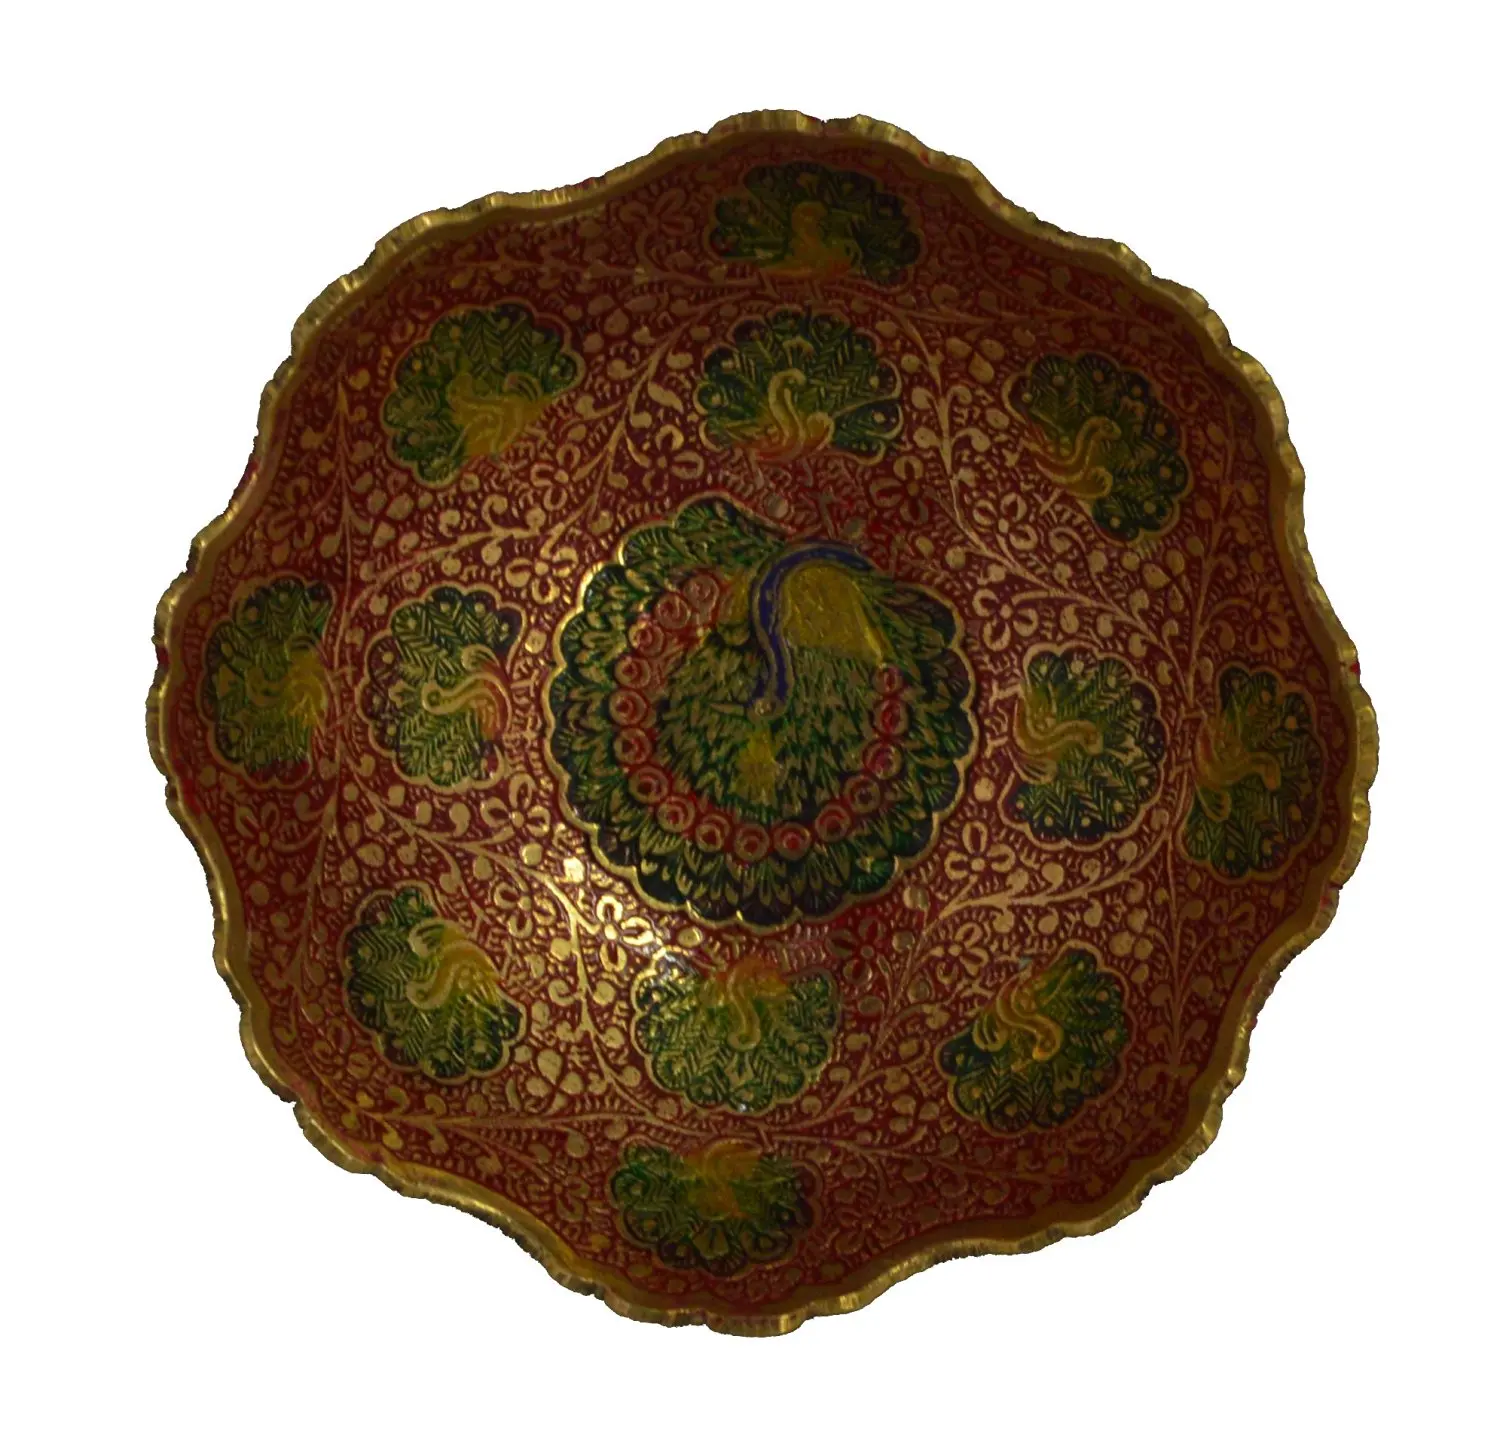 Size 9 Beautiful Green Color Peacock Design Kitchenware Gift Zap Impex Gold Plated Brass Decorative Round Dry Fruit Bowl Carving Work